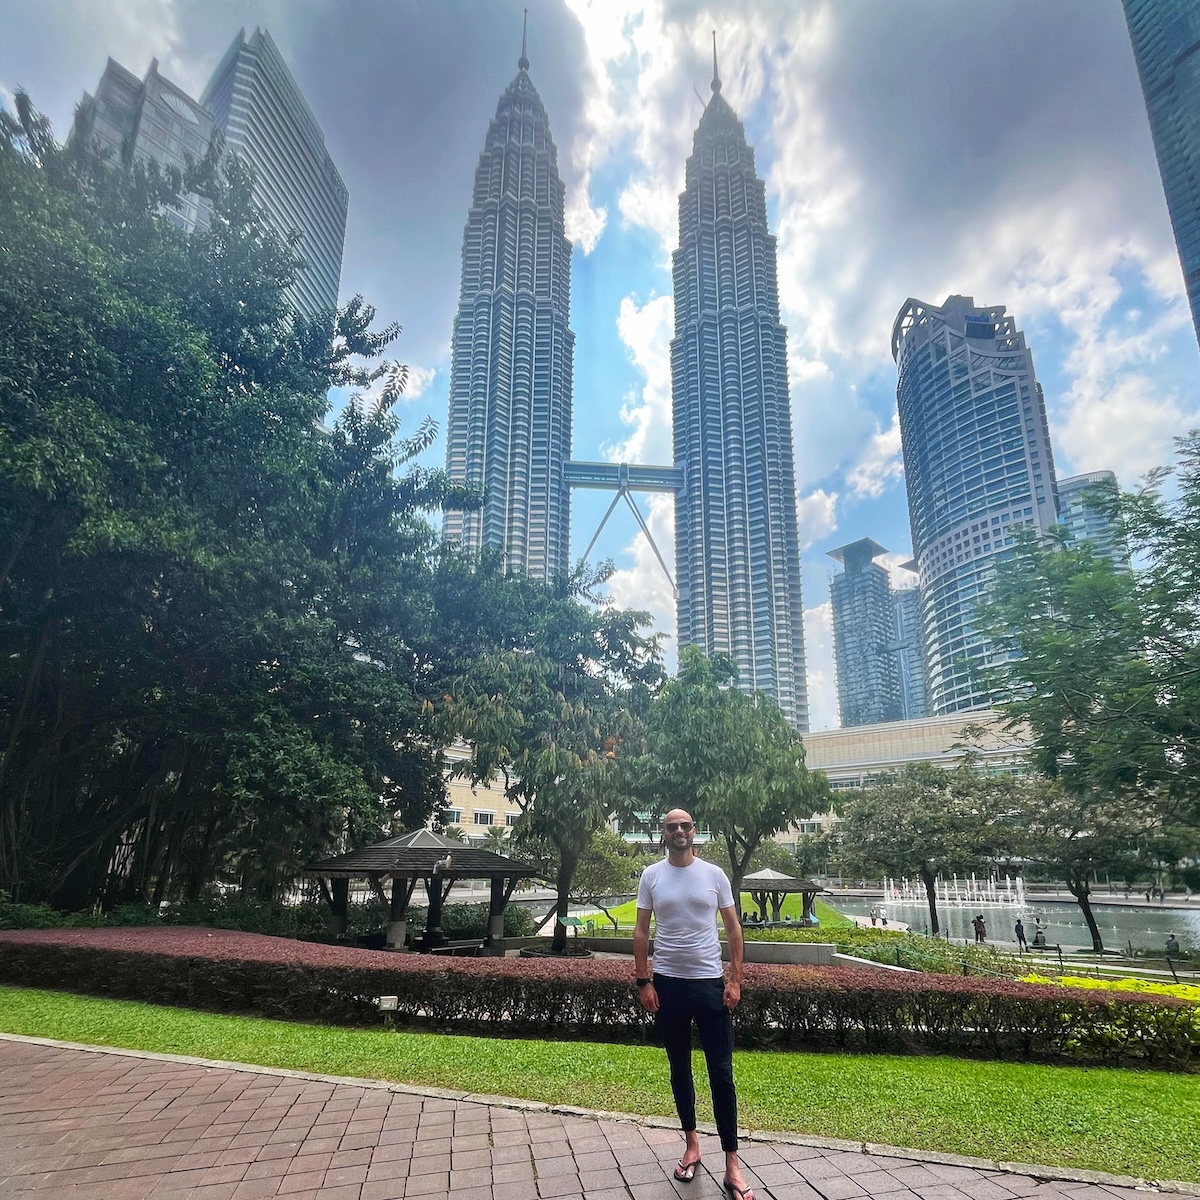 A man standing in a park with the Petronas Twin Towers in Kuala Lumpur, Malaysia, towering in the background under a partly cloudy sky. The lush greenery of the park contrasts with the modern skyscrapers.